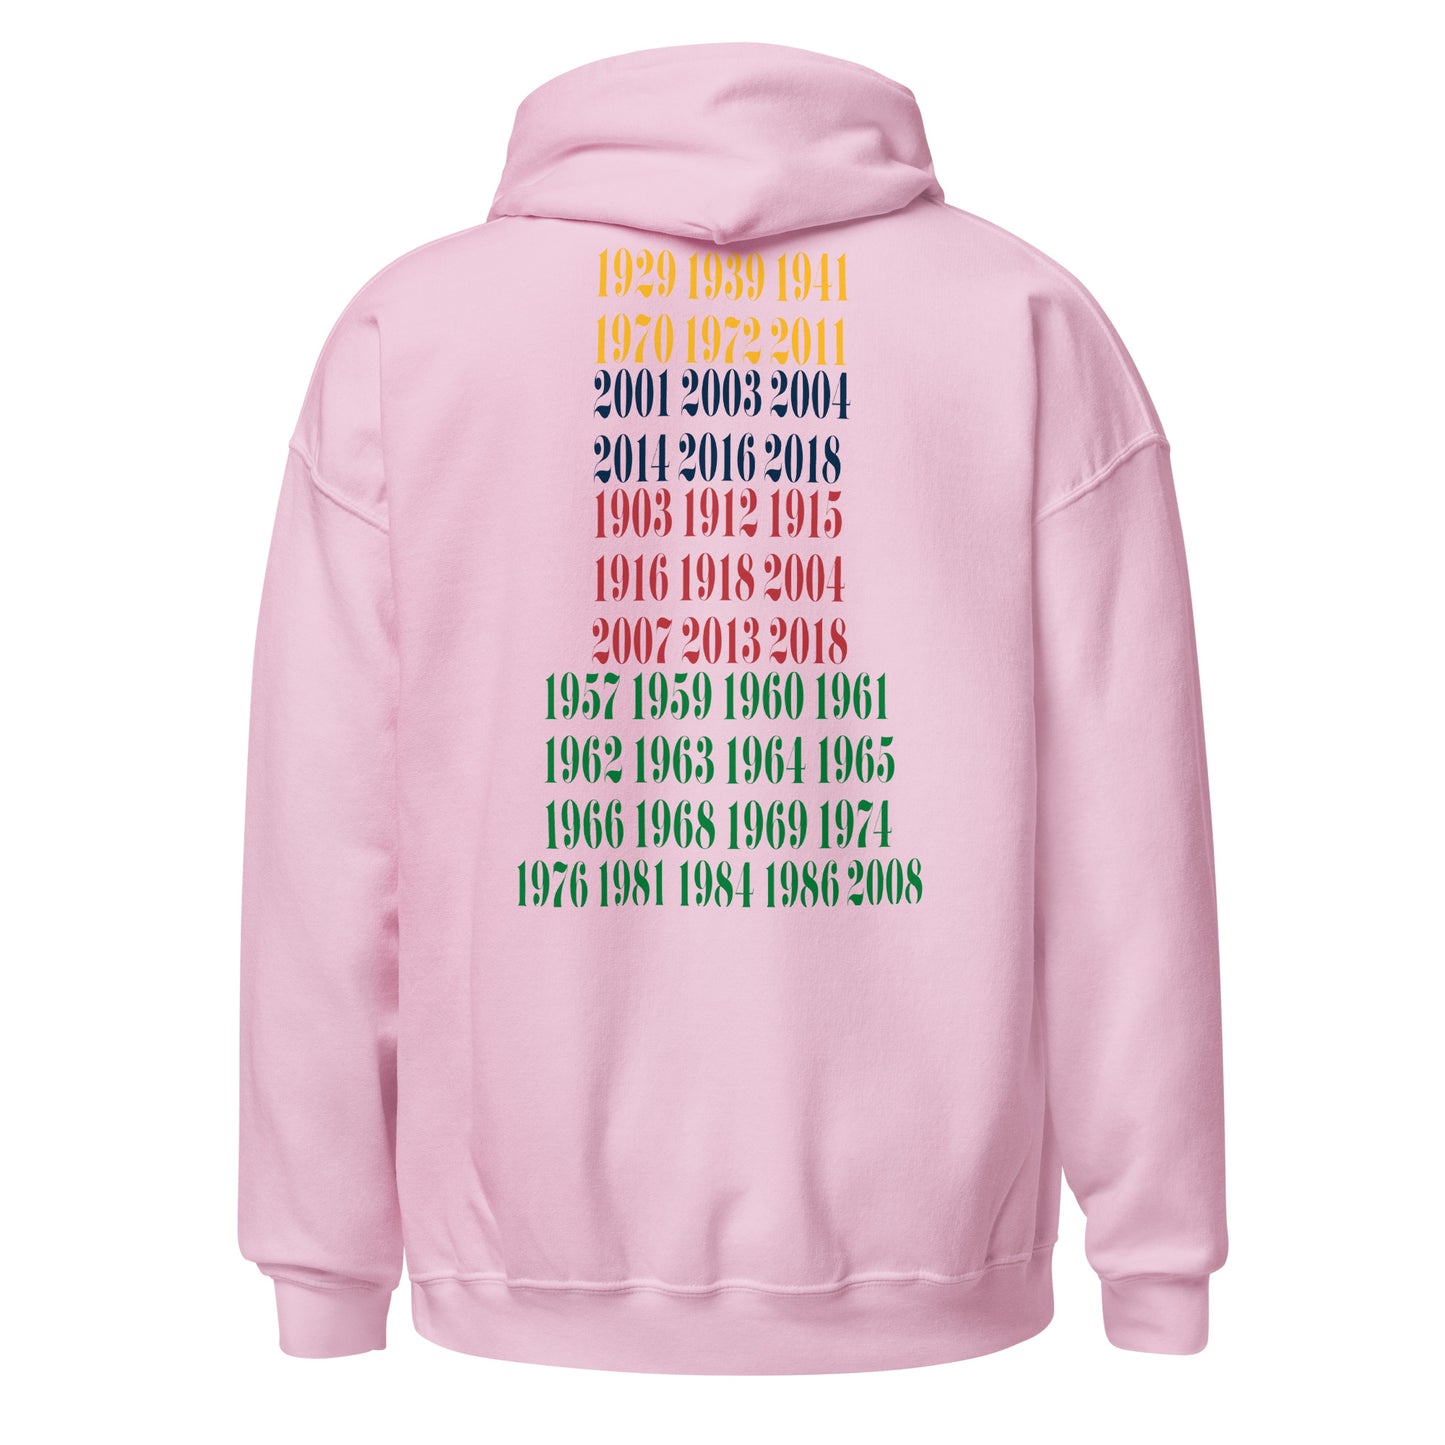 The Championship Tour Hoodie